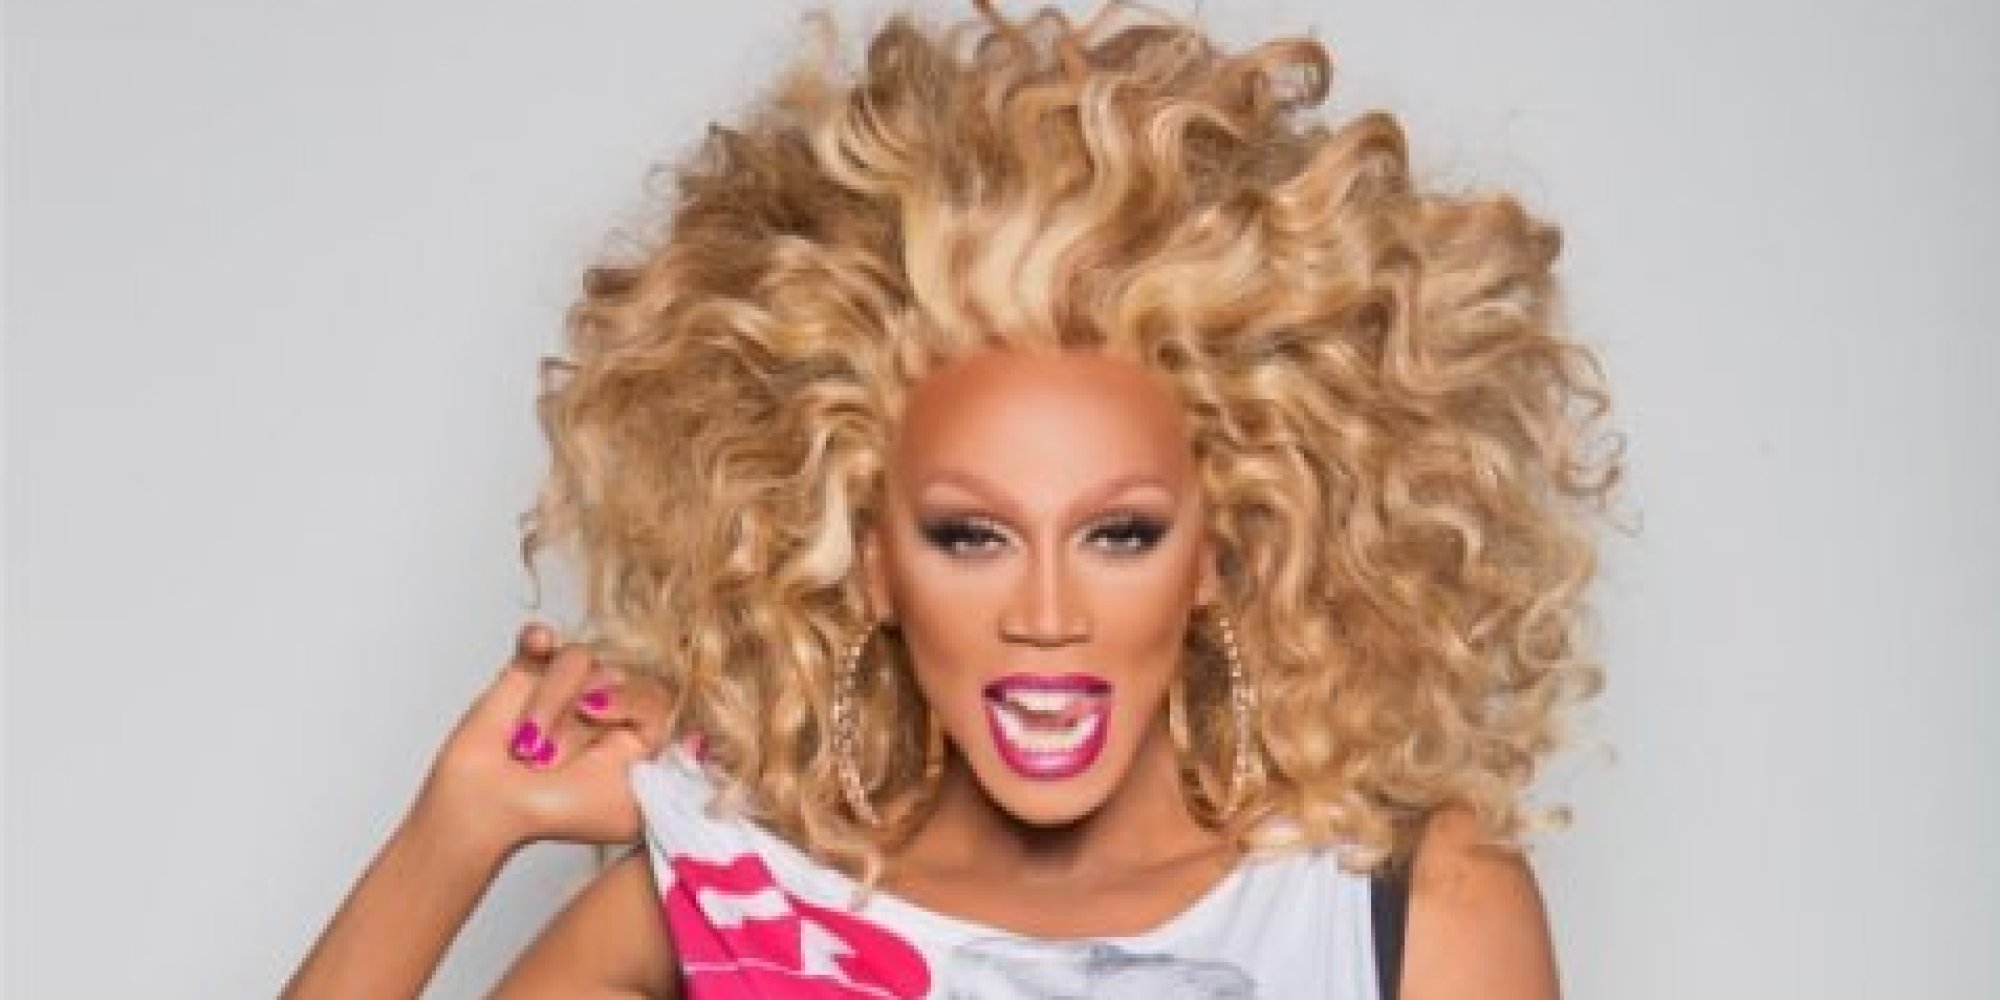 10 Iconic Drag Queens Who Have Slayed The Beauty And Fashion Game 0566